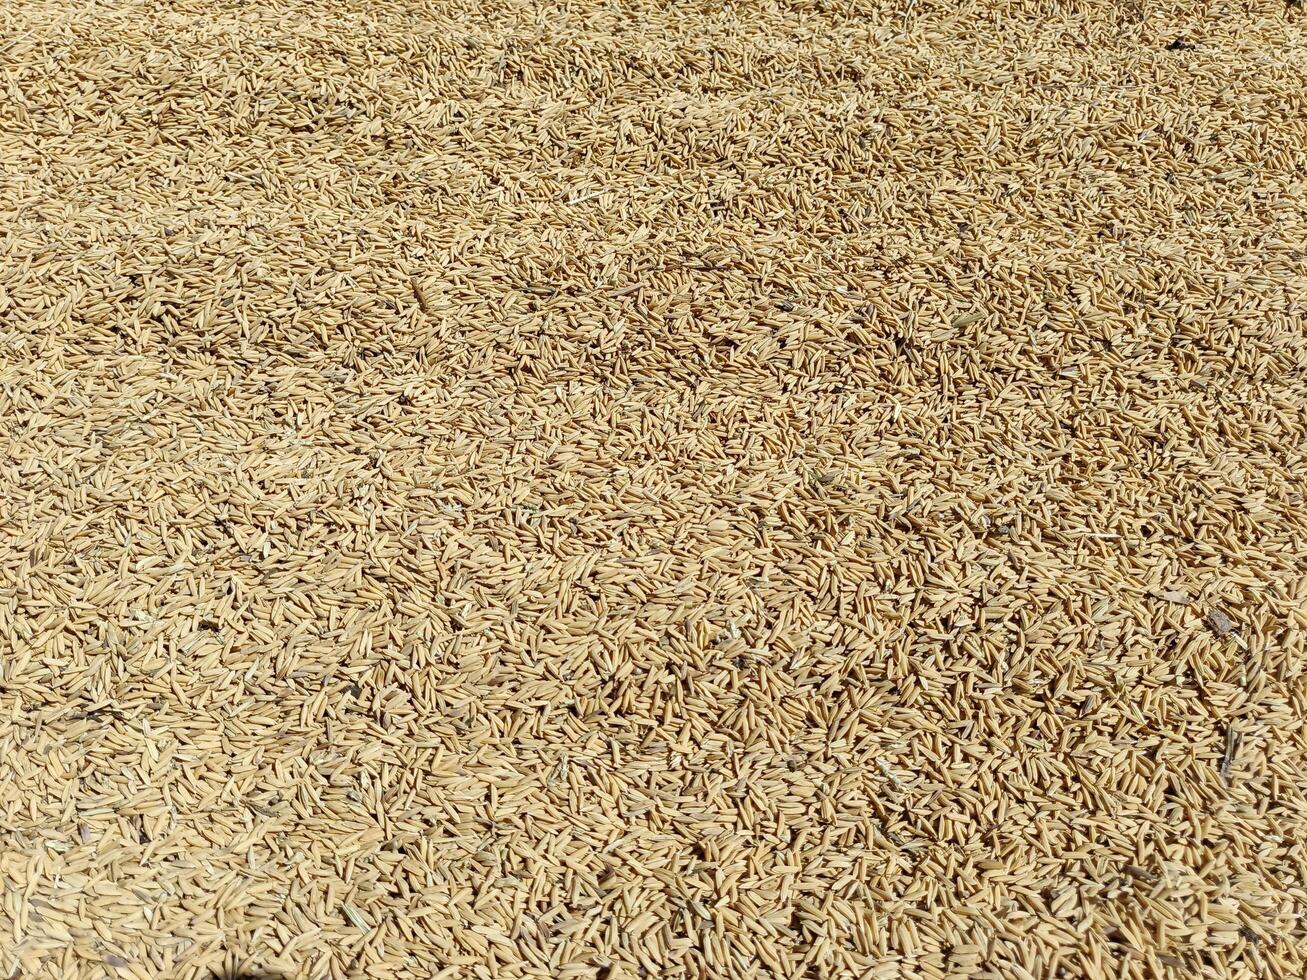 Paddy rice grain drying on a wide field photo